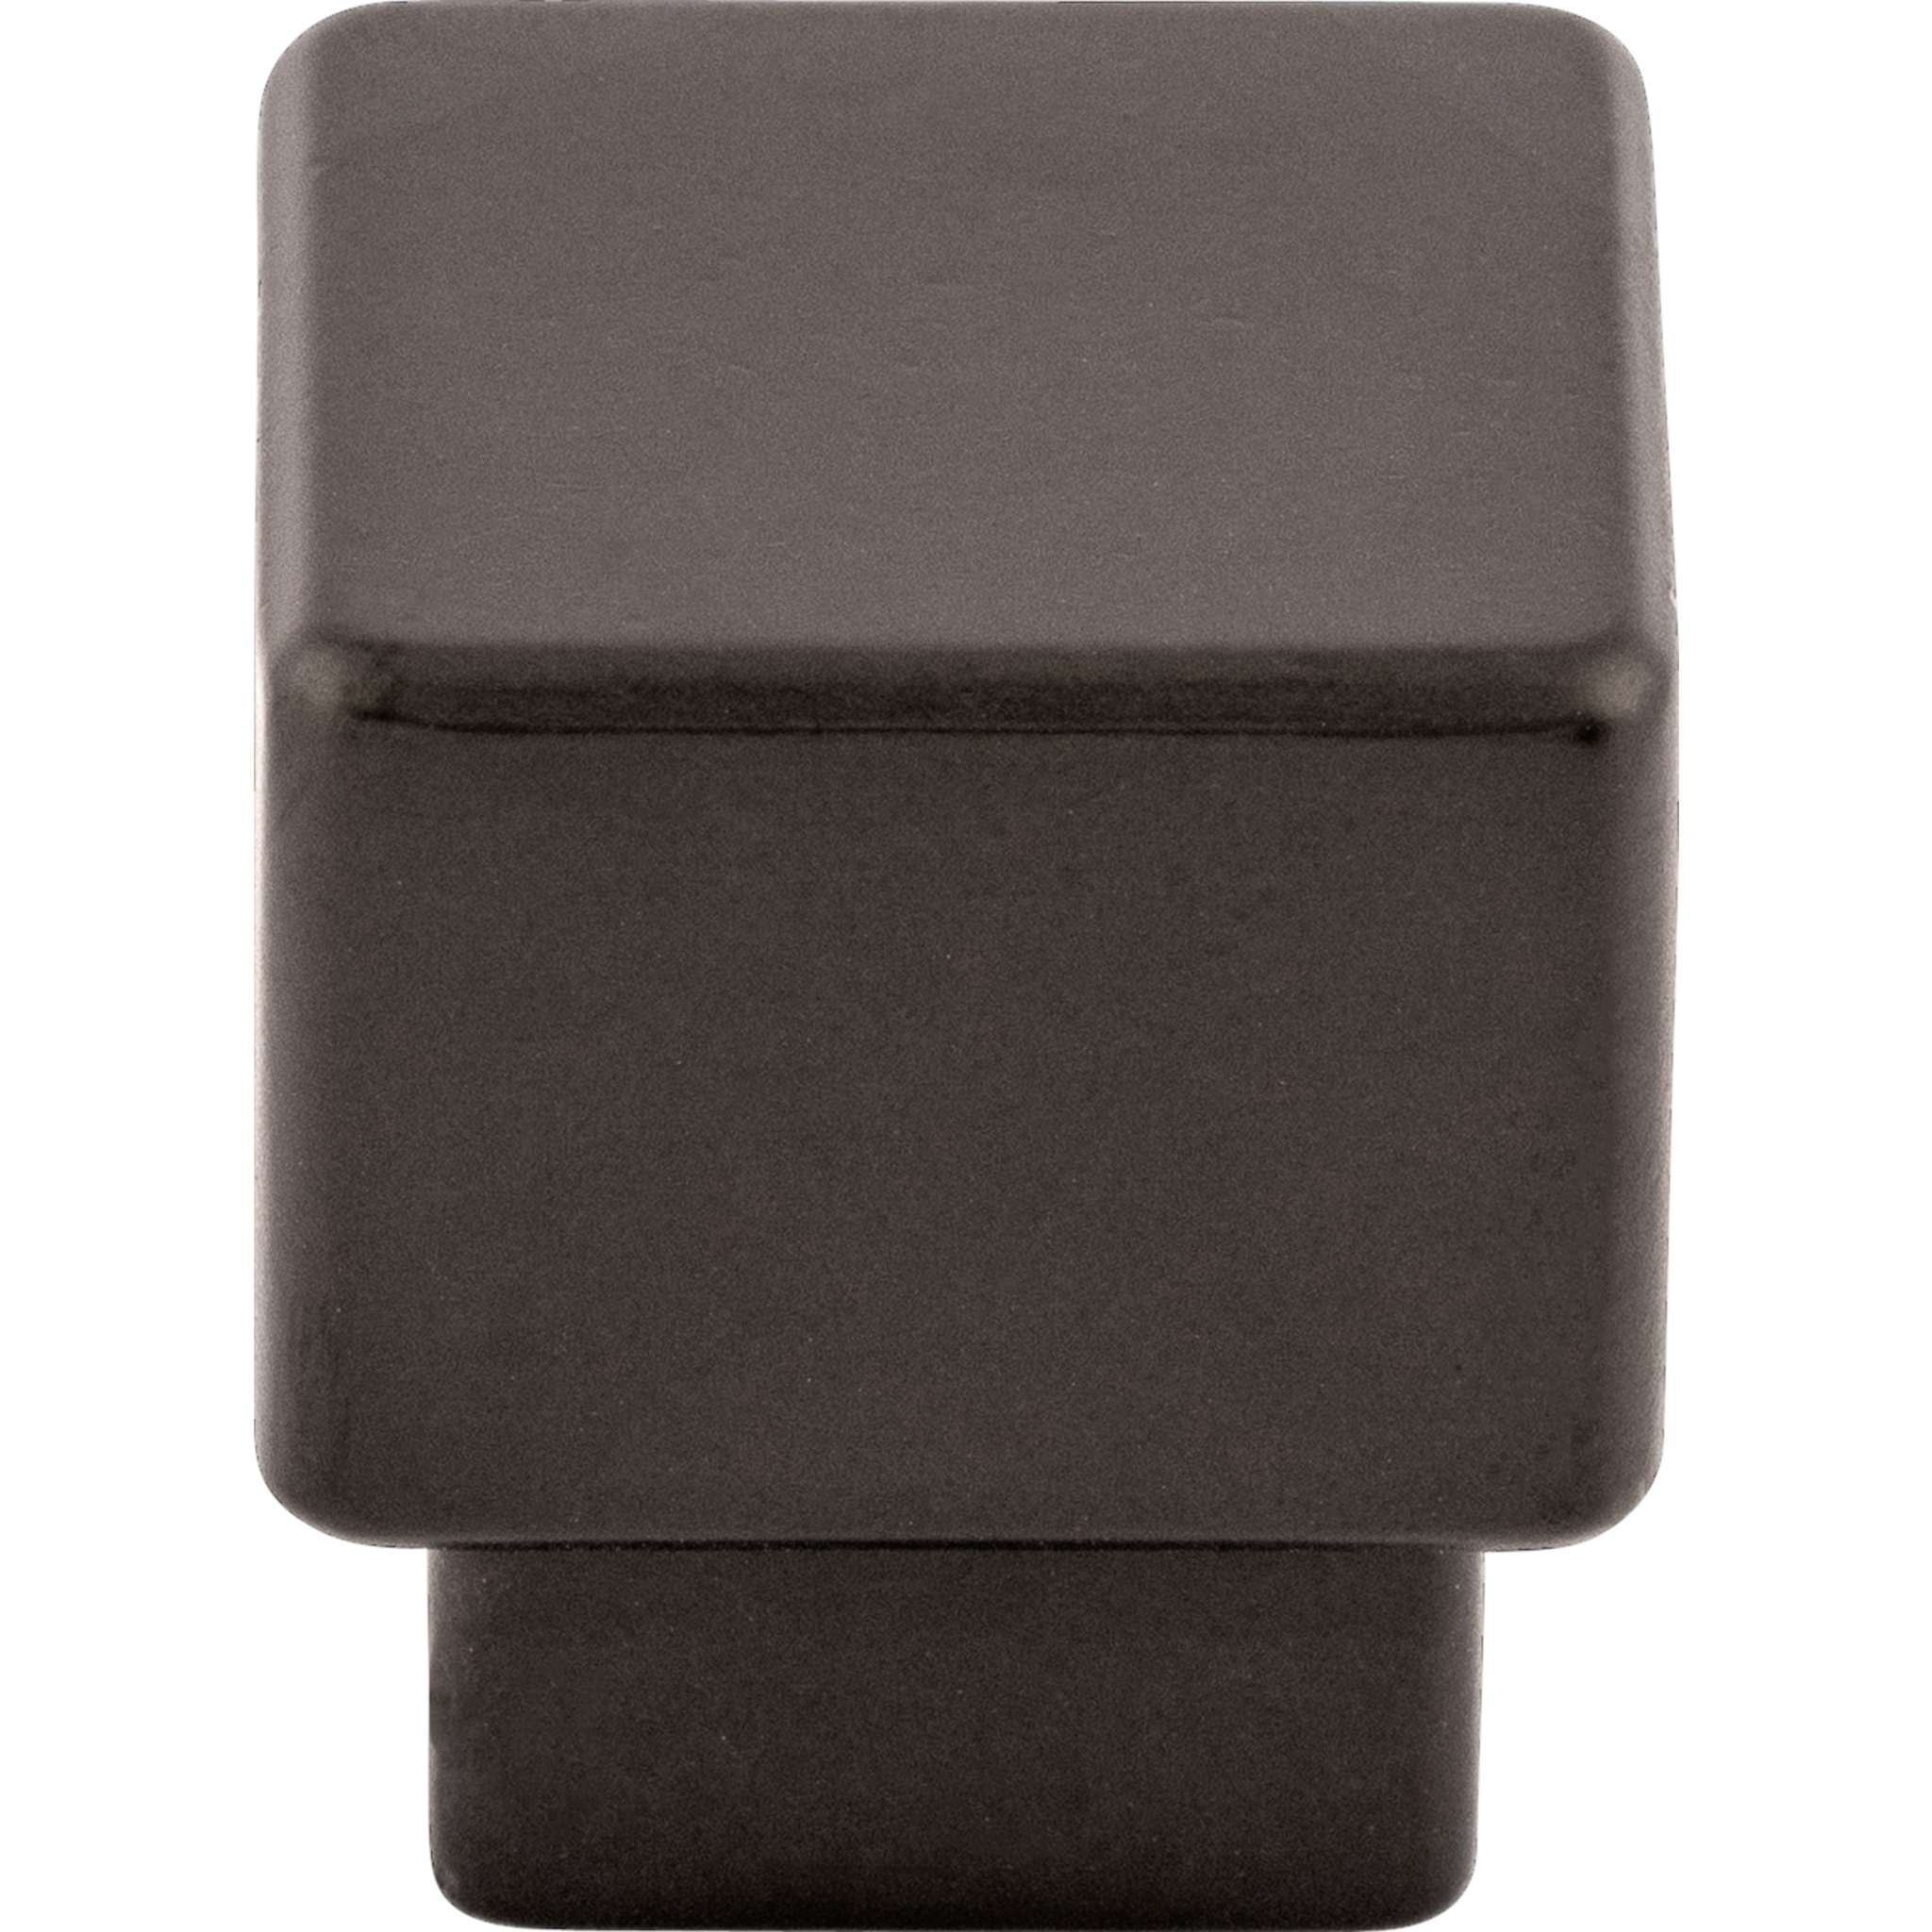 Top Knobs - Tapered Square Knob